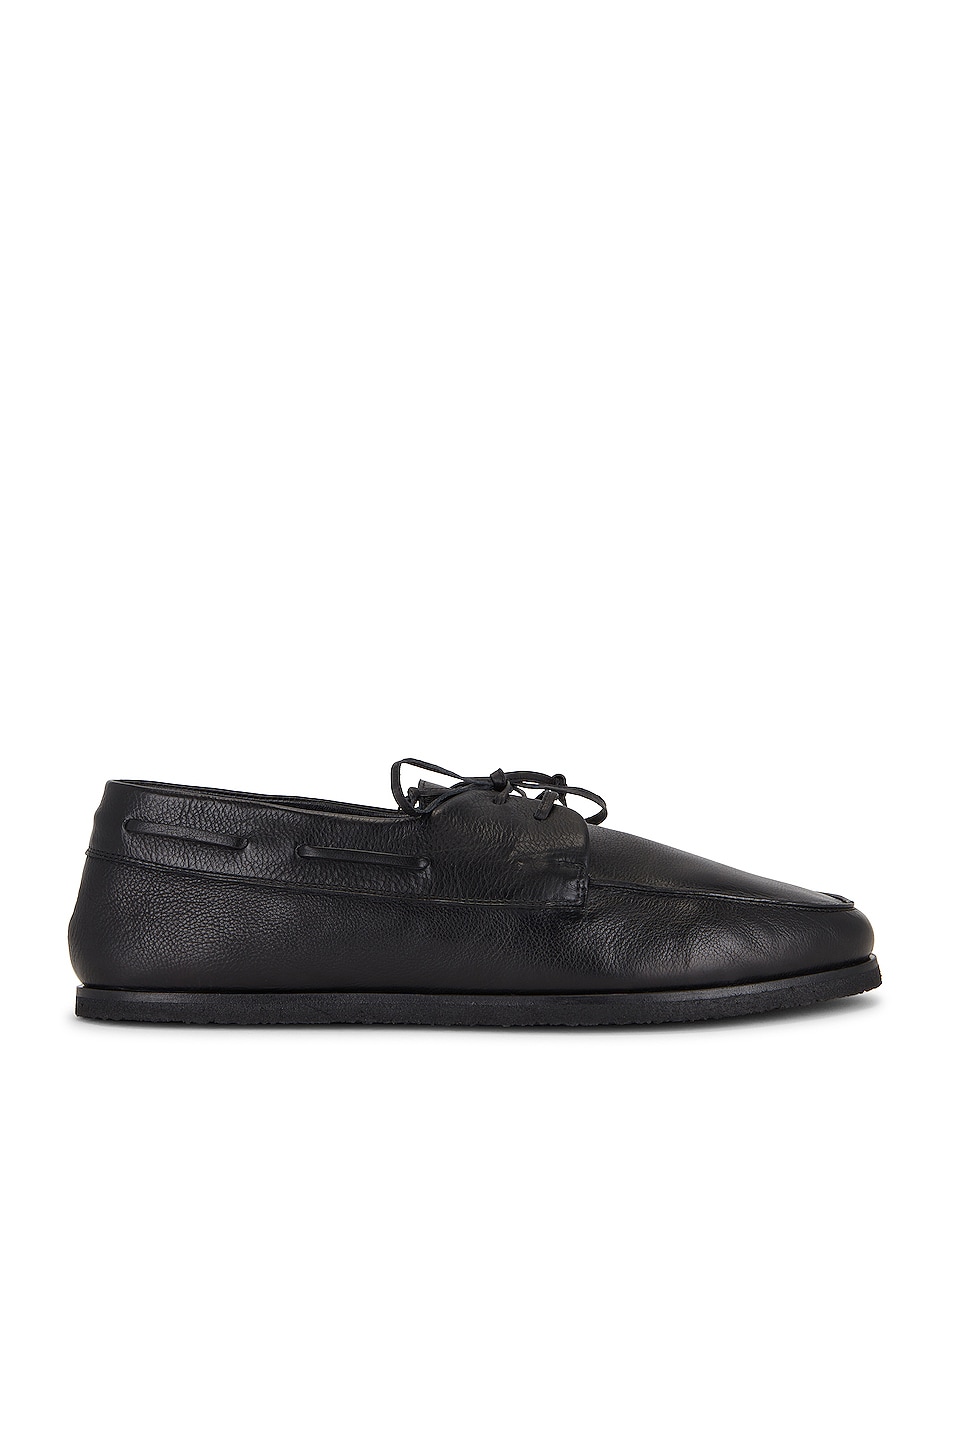 Image 1 of The Row Sailor Loafer in Black